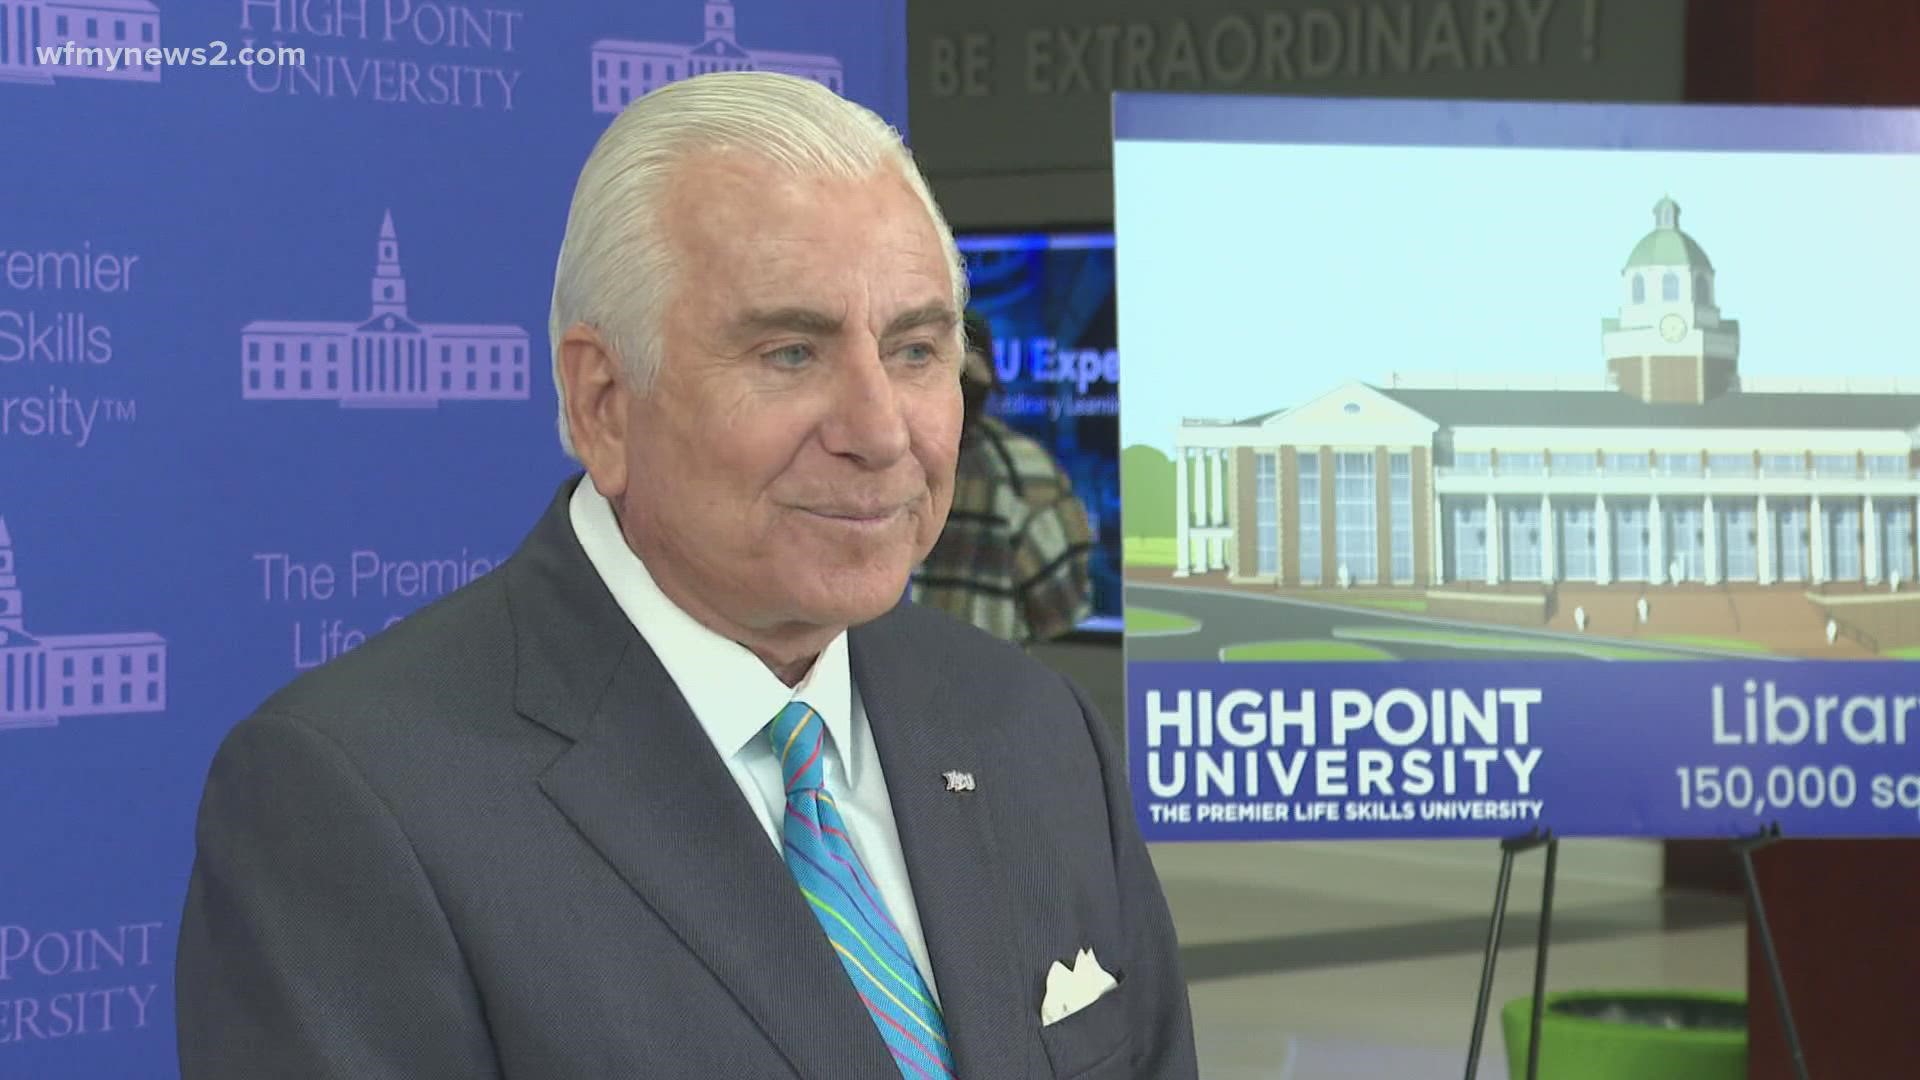 High Point University is expanding thanks to three historic gifts totaling $100 million from three families.